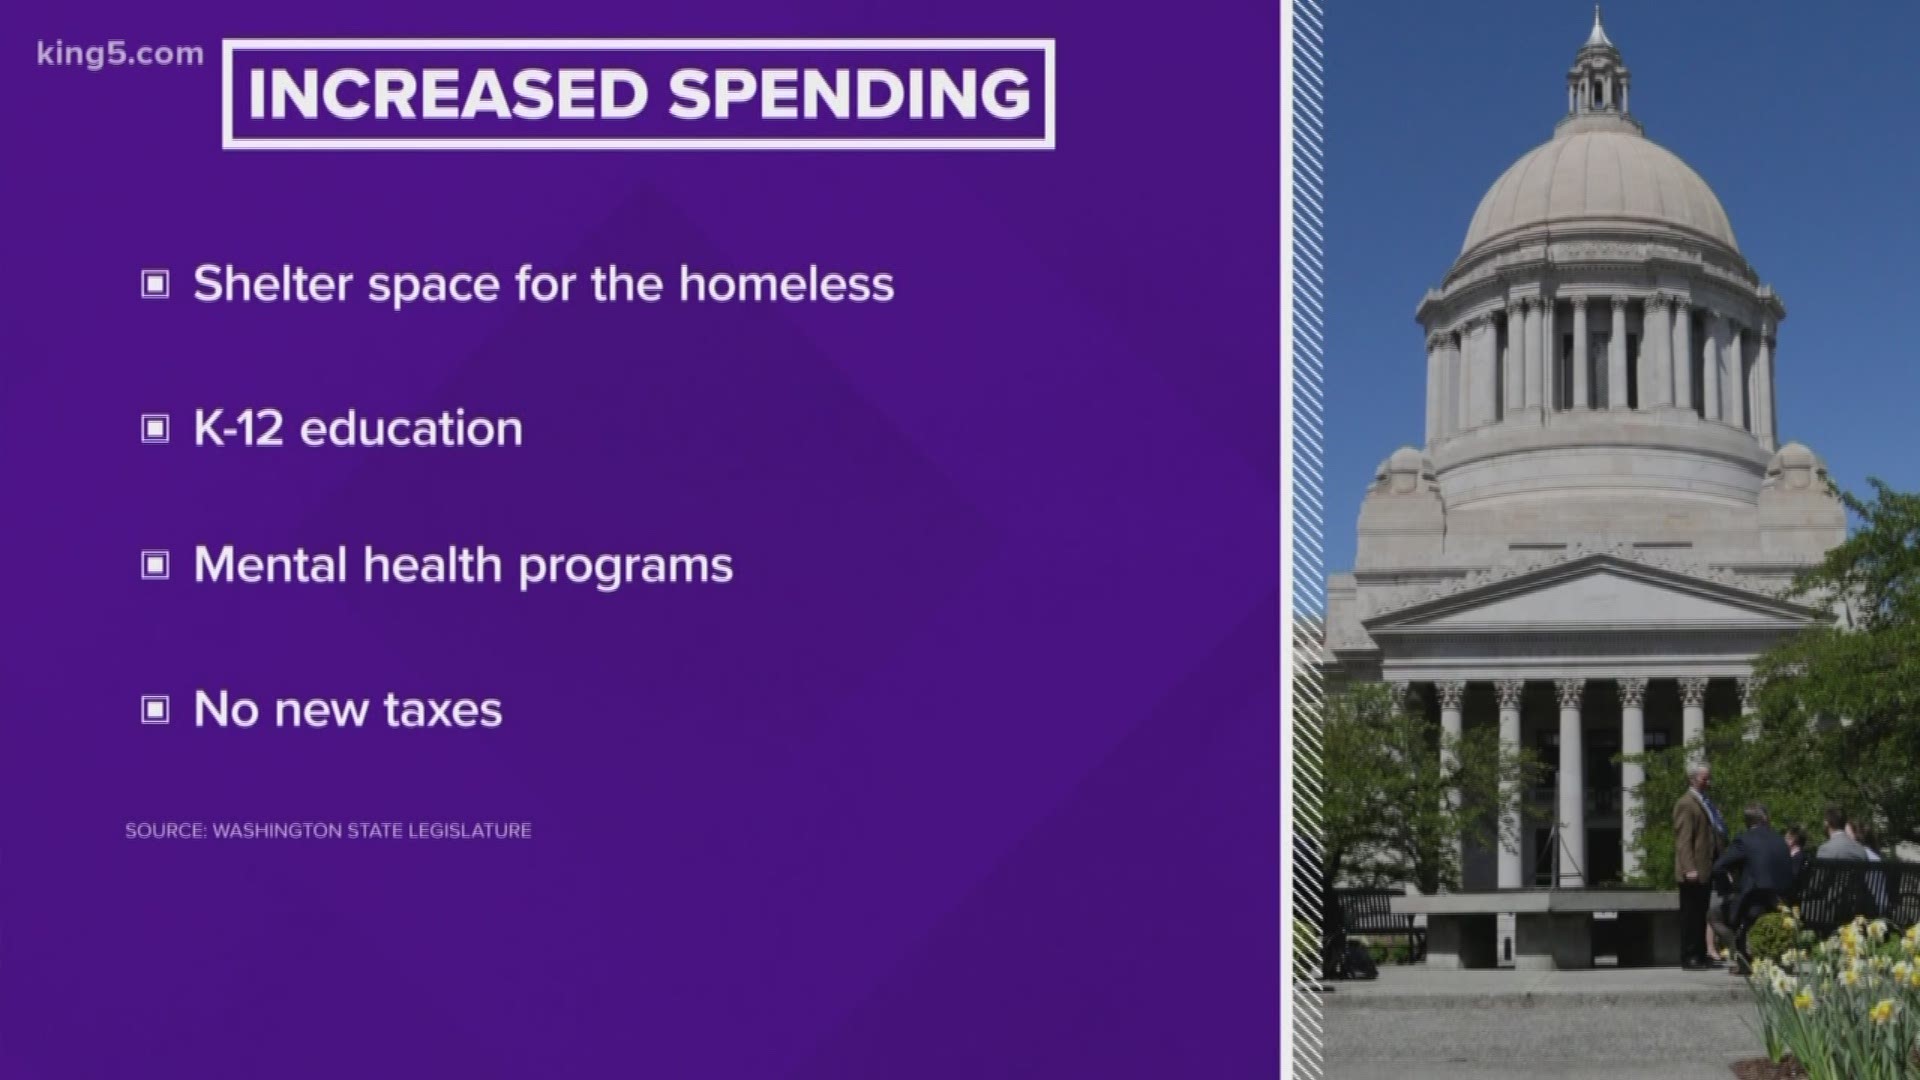 One proposal from Washington Democratic lawmakers proposes about $235 million in new spending on homelessness.